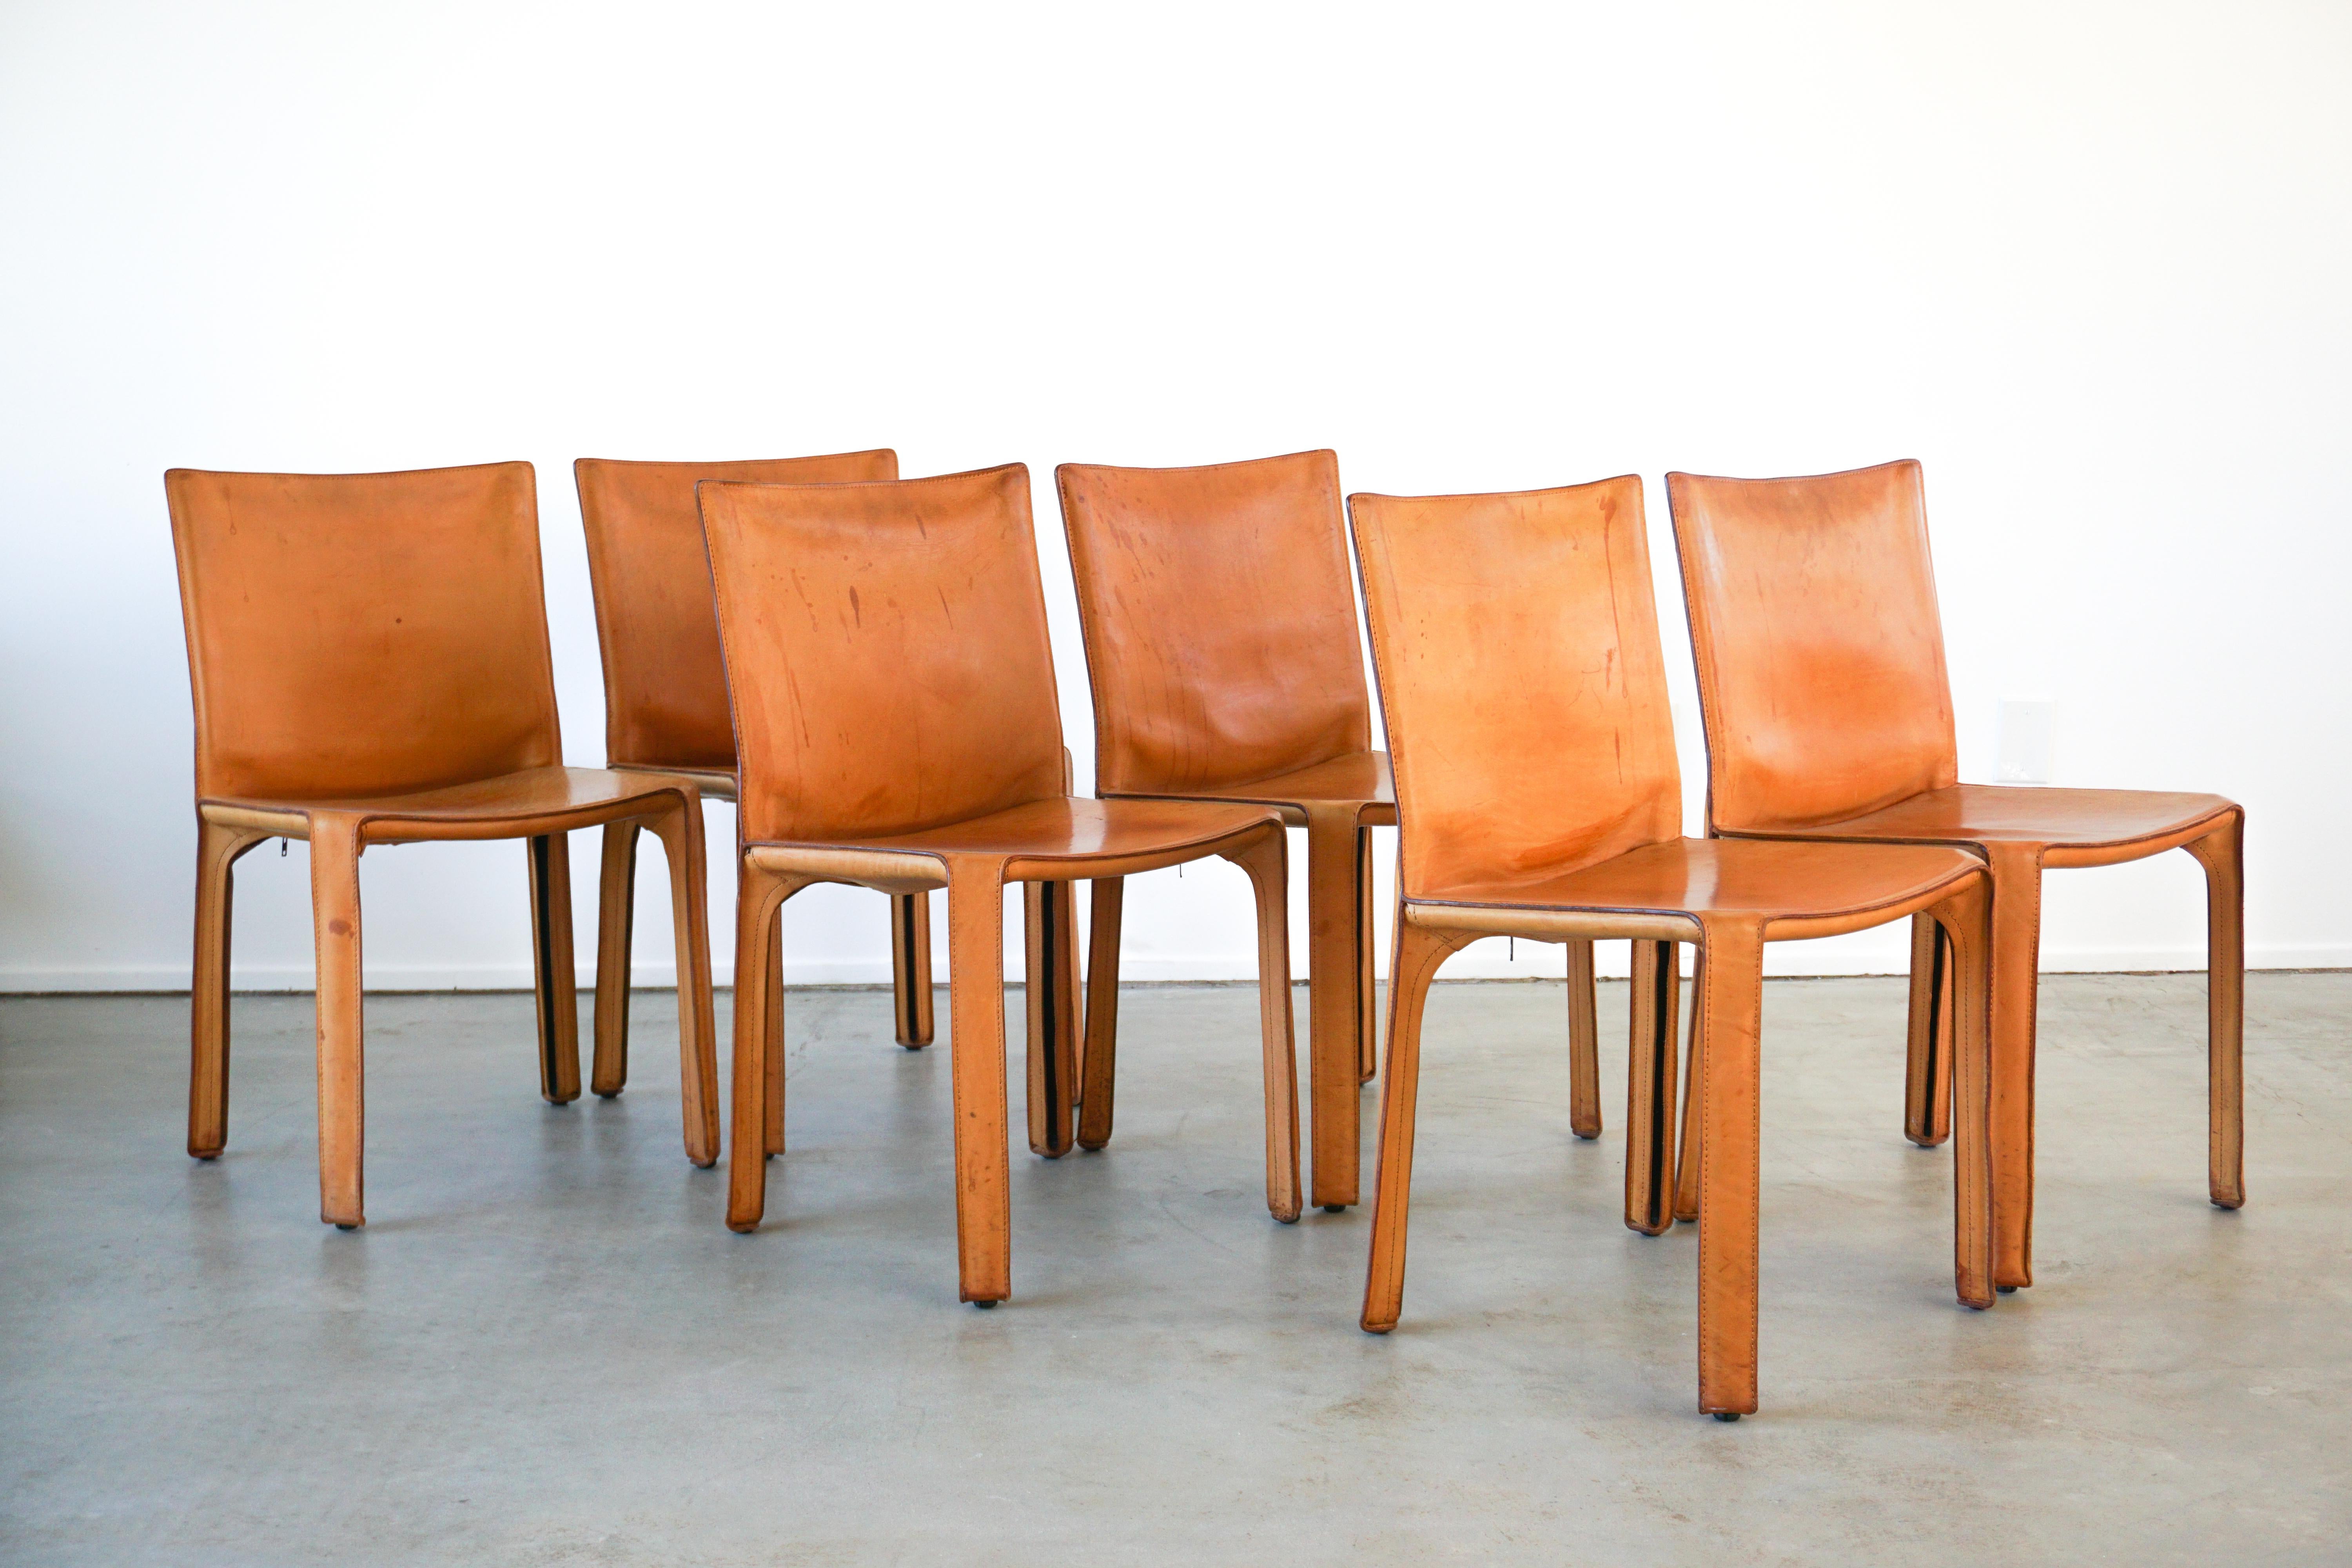 Classic leather cab chairs by Mario Bellini for Cassina.
Great original patina to leather 
Priced individually.
Set of six.